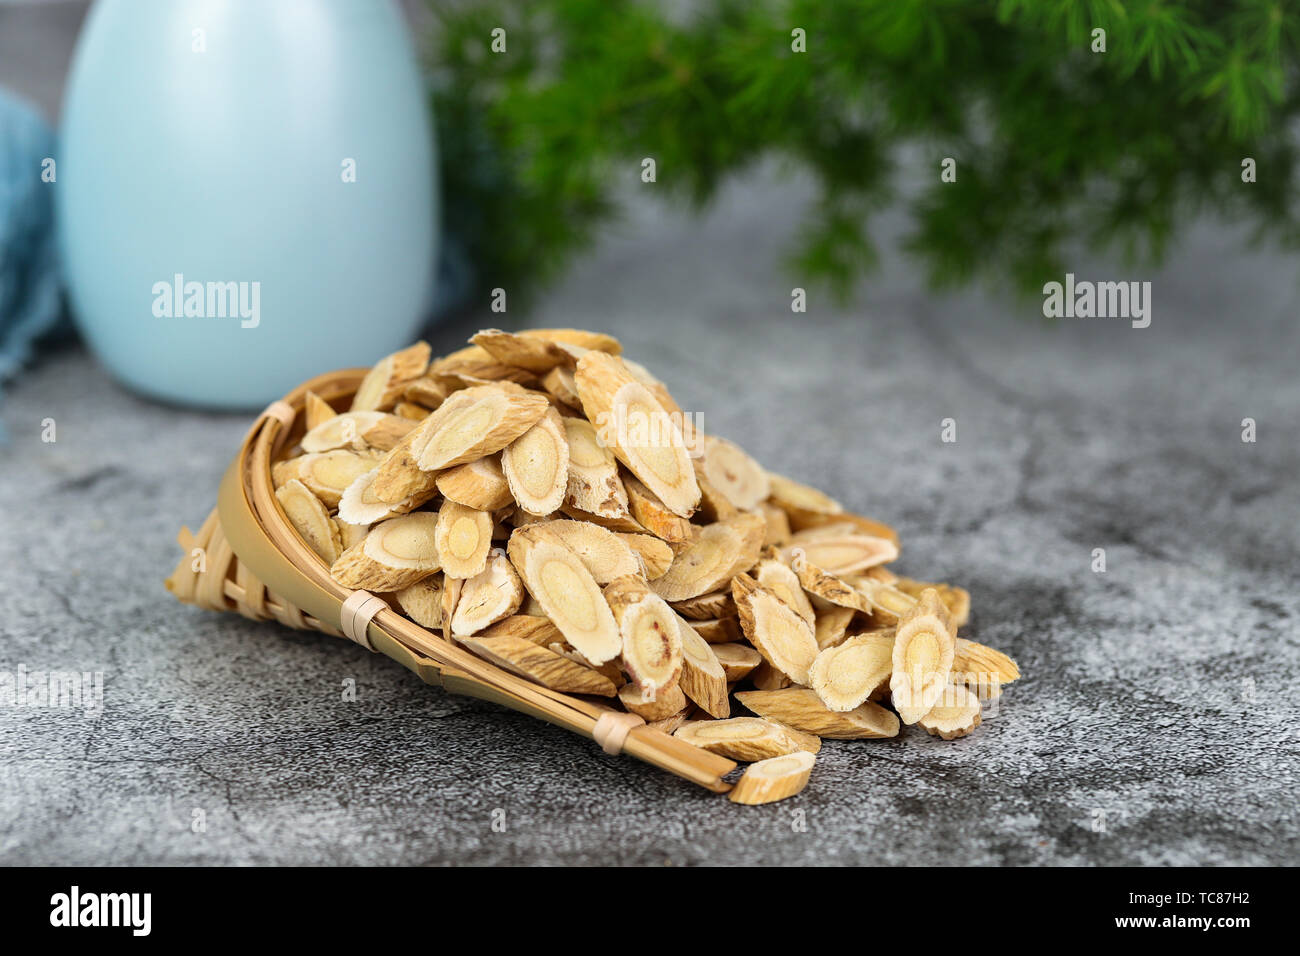 Astragalus tablets Stock Photo